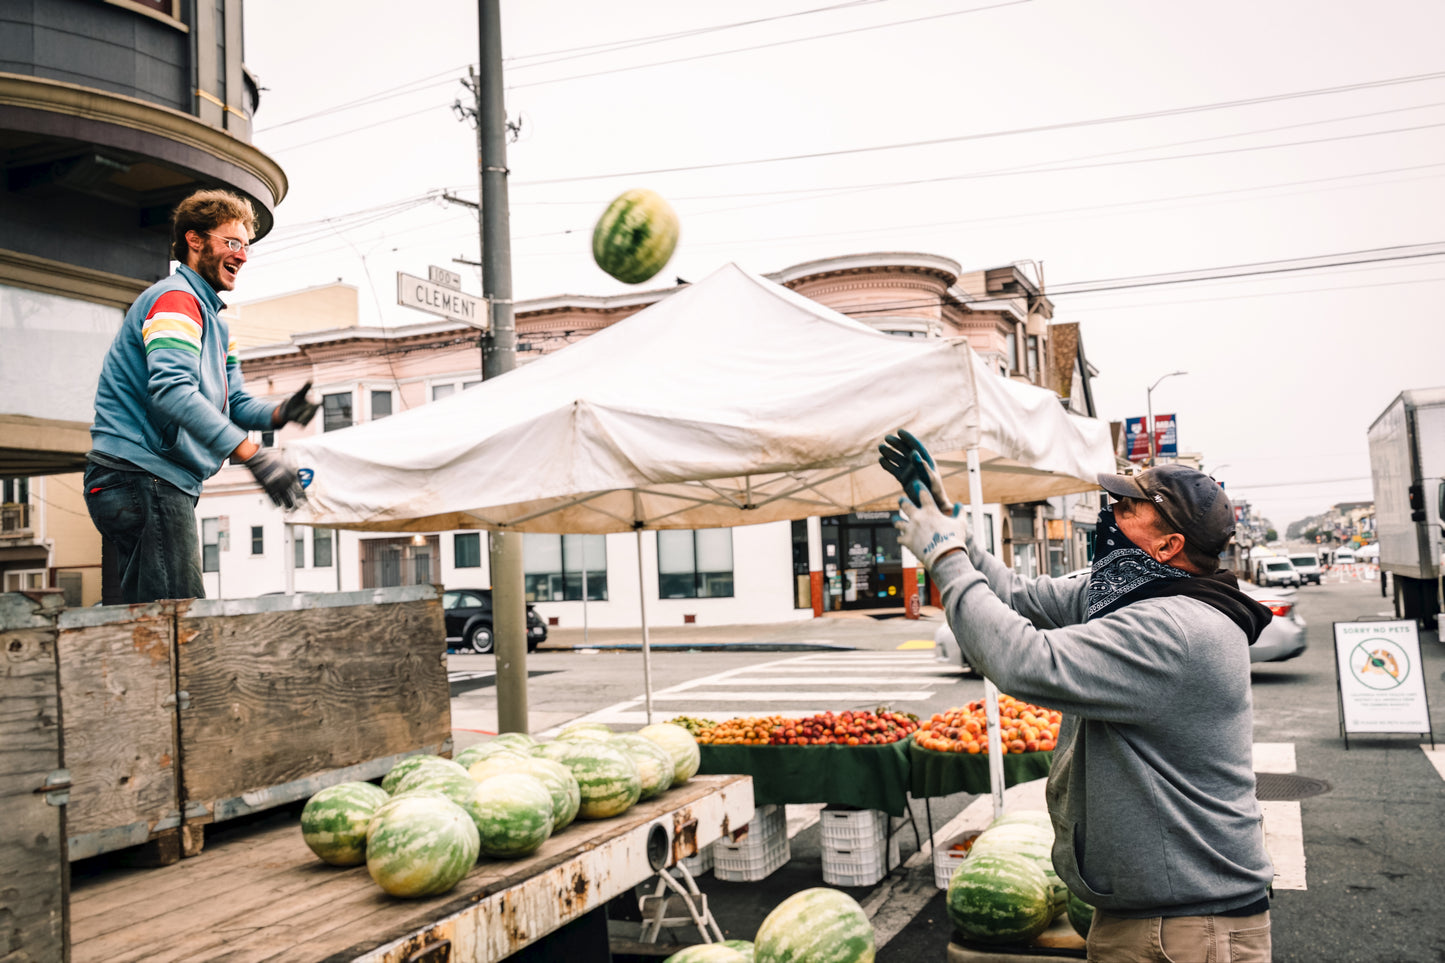 "Watermelon Tossing at the Clement Farmer's Market"